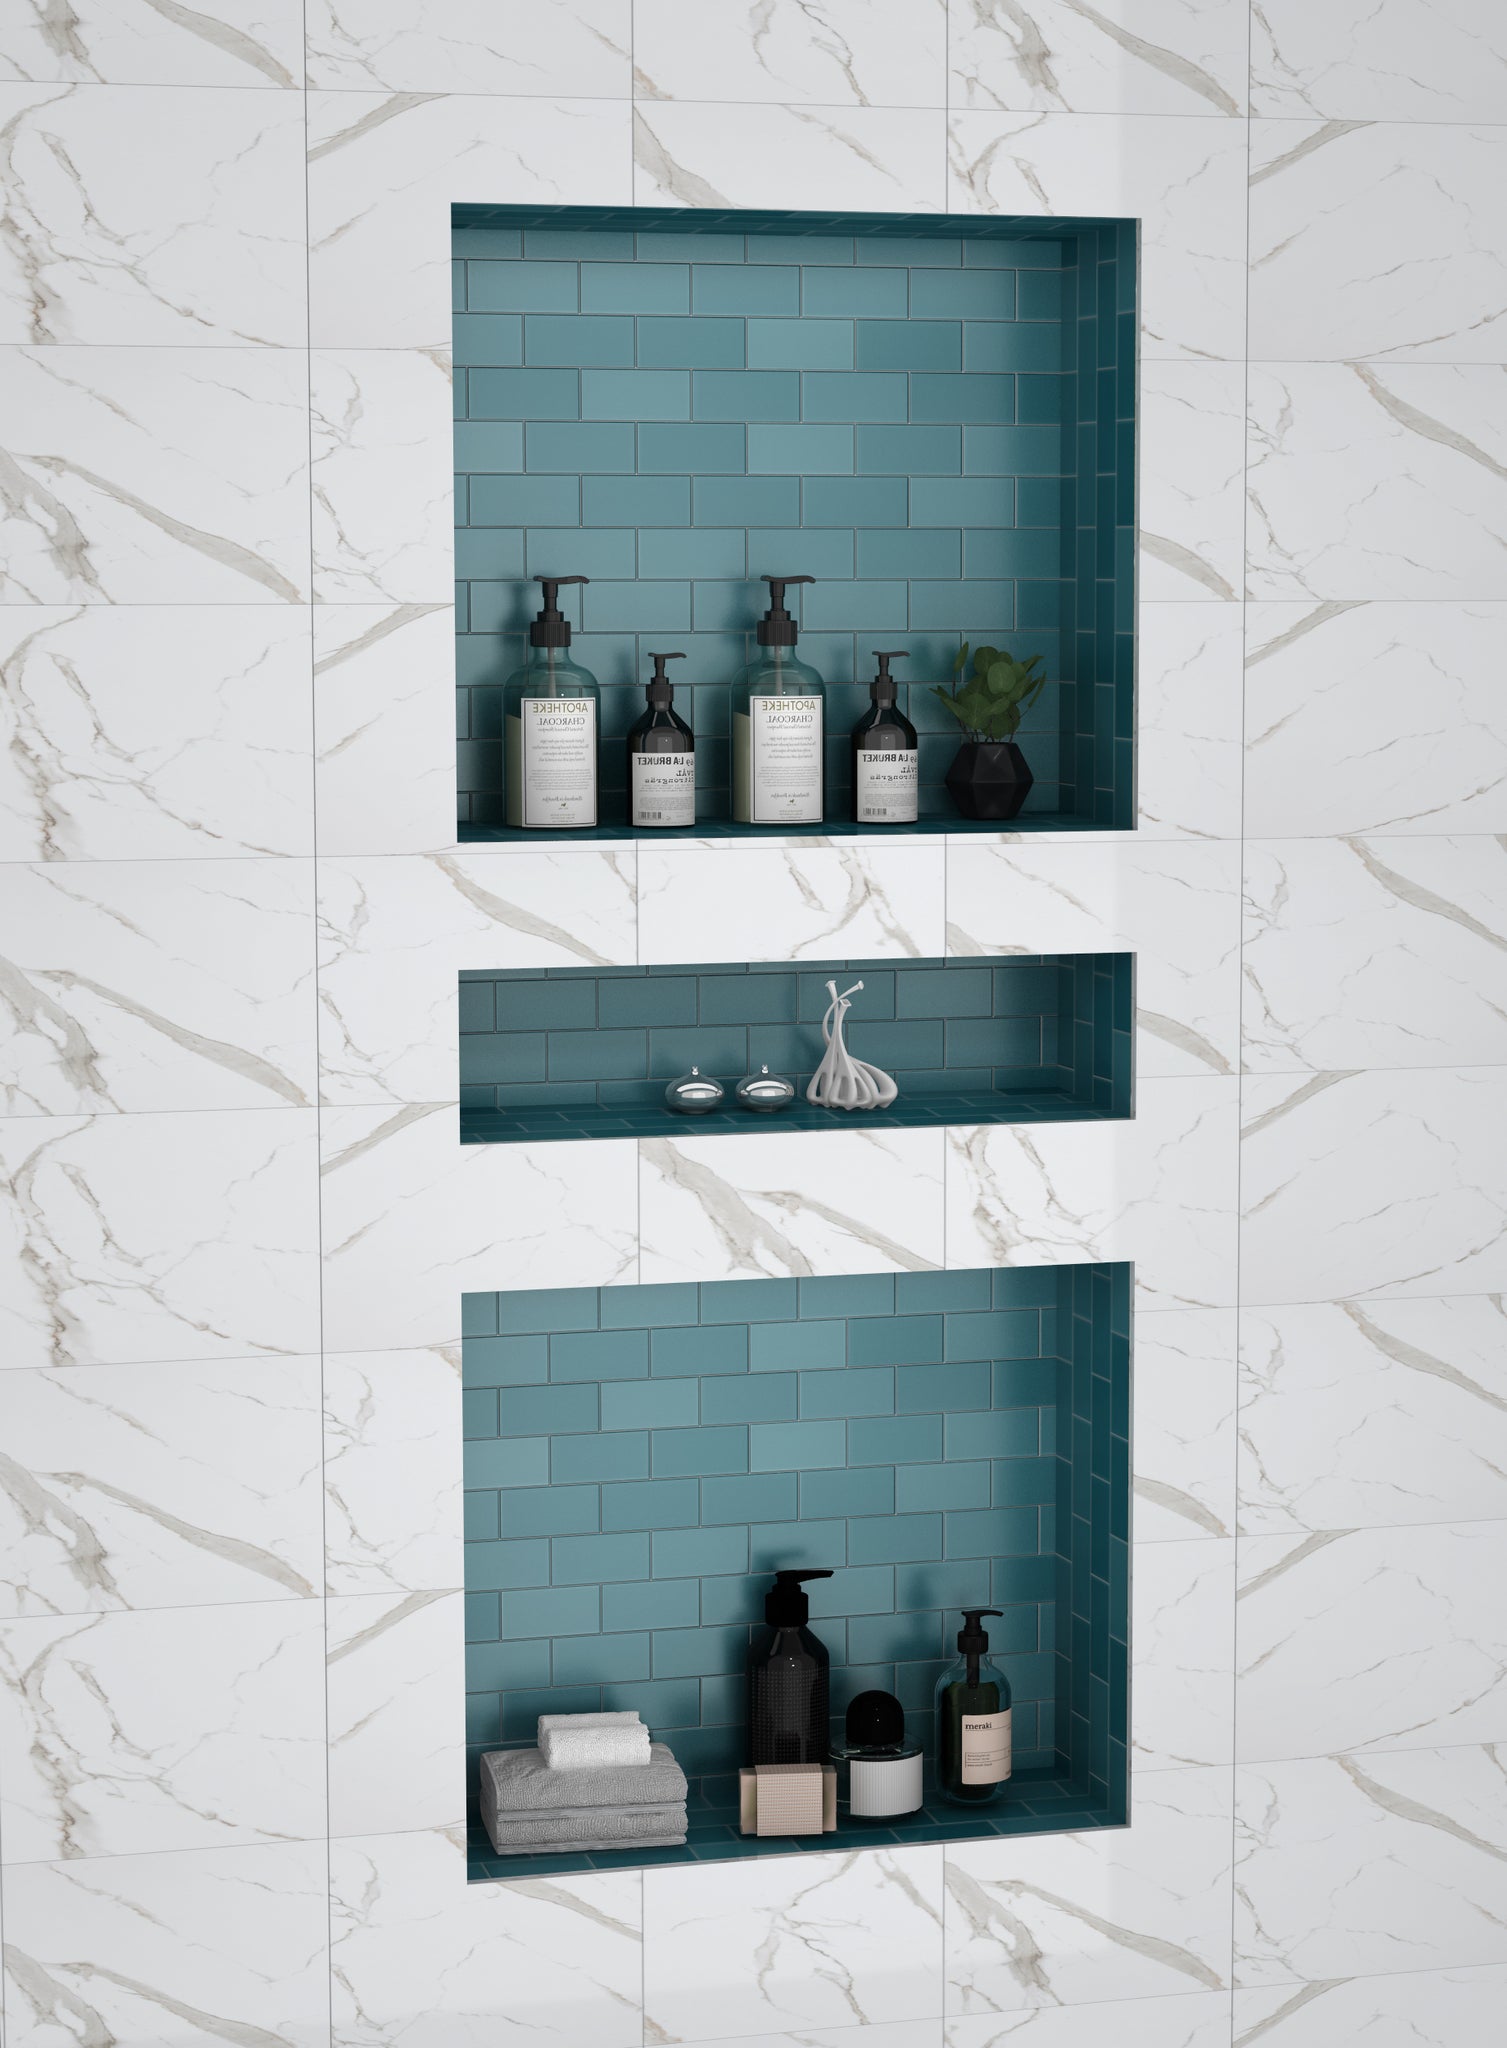 Uni-Green Large Corner Shower Shelf, Triangle Shower NICHE 14x60 Ready to Tile with 4 Shower Shelves in Stainless Steel 304